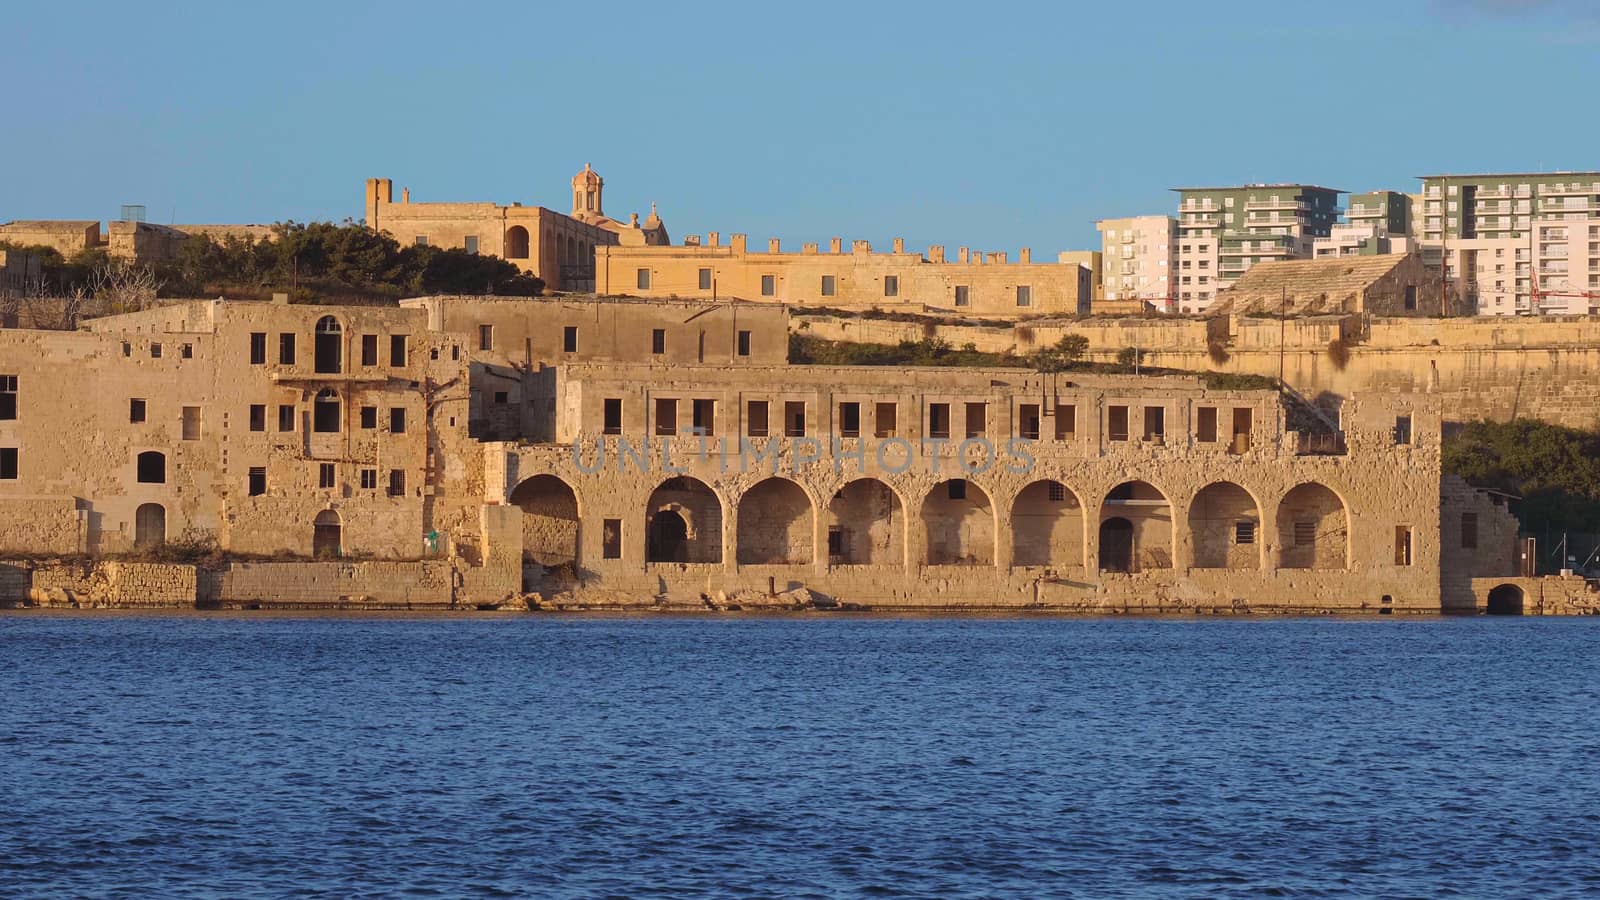 Old walls and buildings on Malta by Lattwein